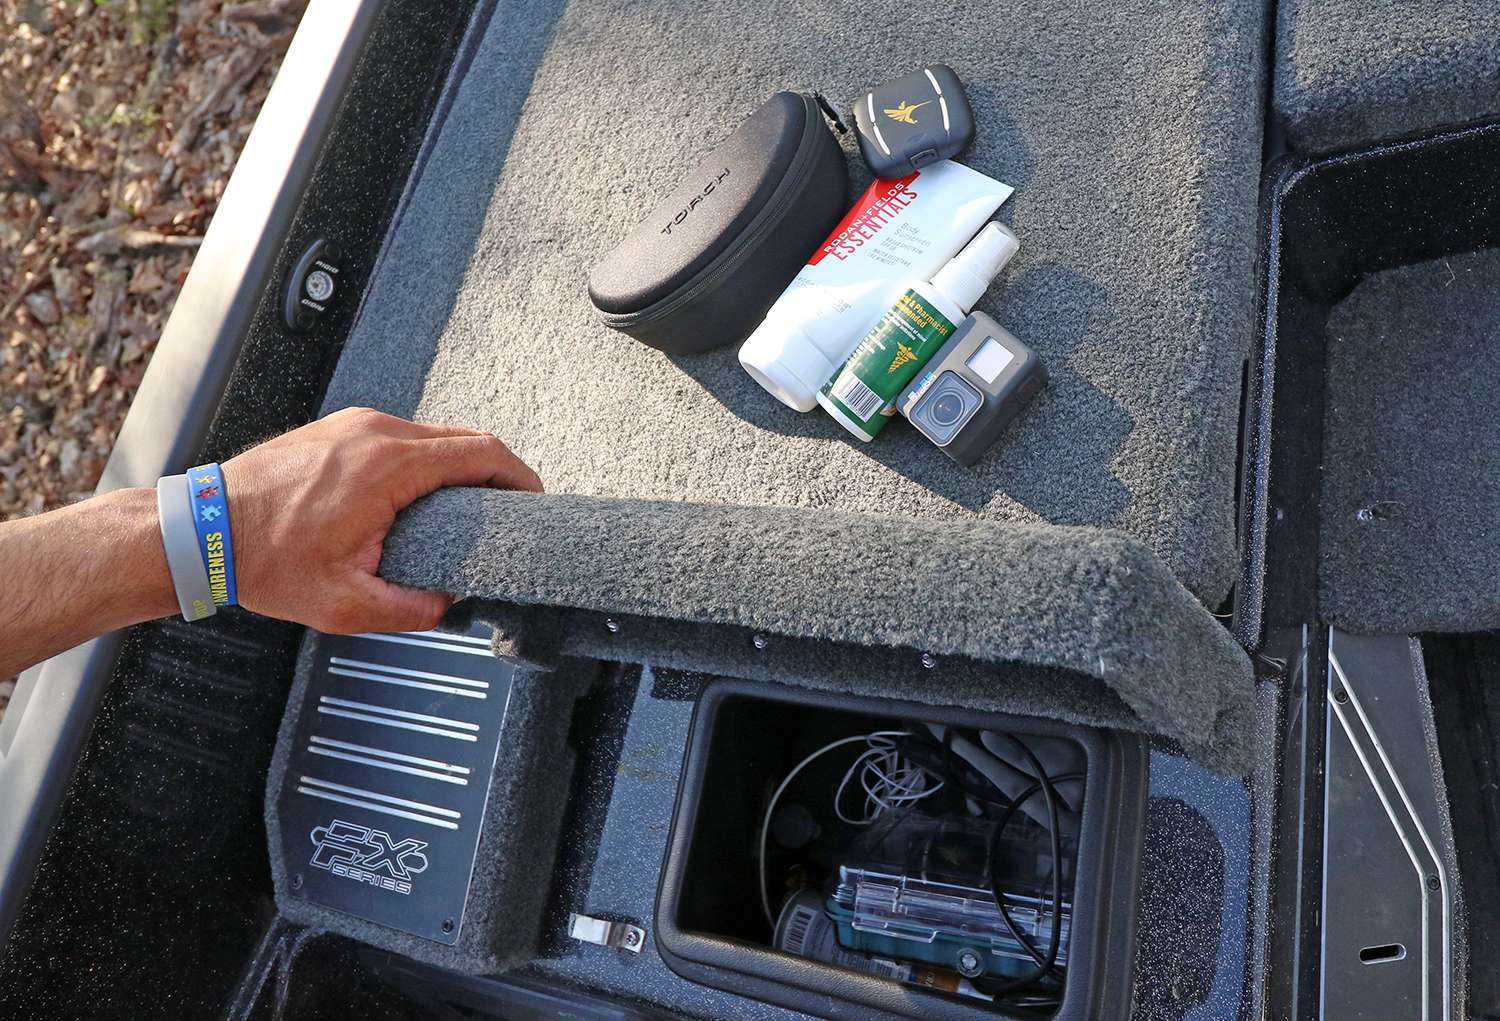 In front of the passenger seat is a small storage box that keeps other necessities handy like LakeMaster cards, a GoPro, sunblock, sunglasses and other items.